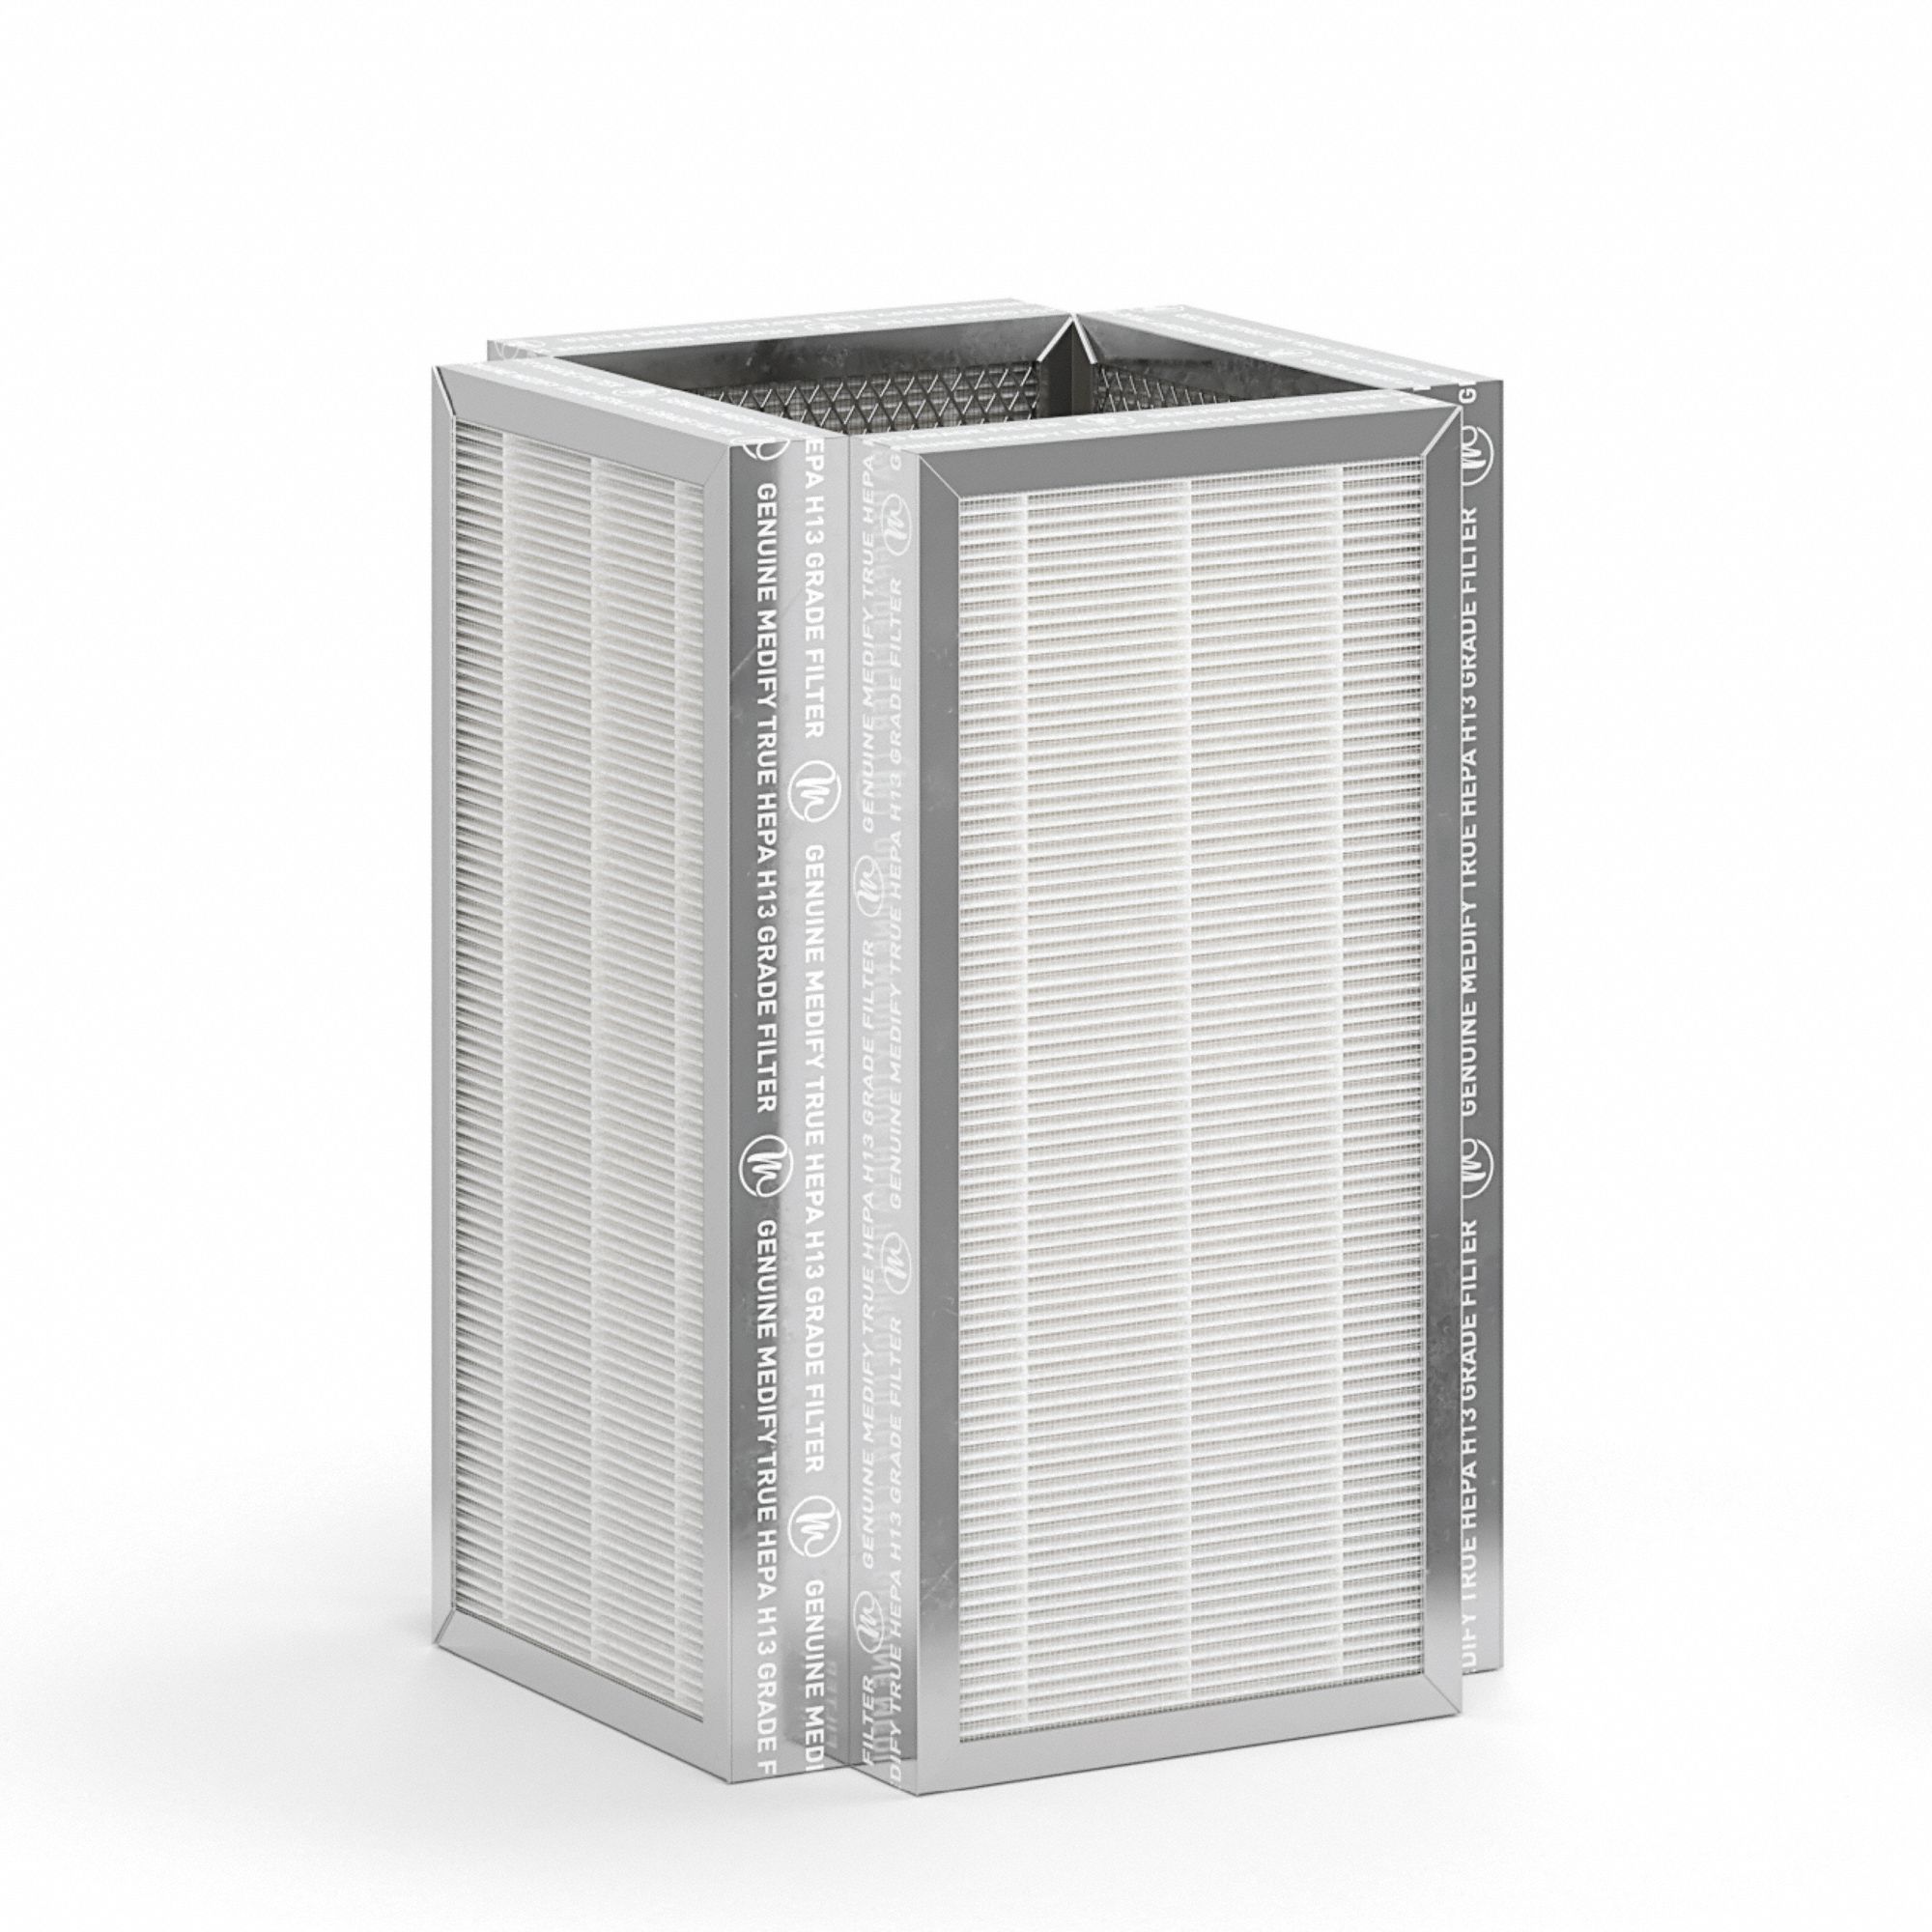 Replacement filter for MA-50: HEPA/Pleated/Carbon, MERV 17